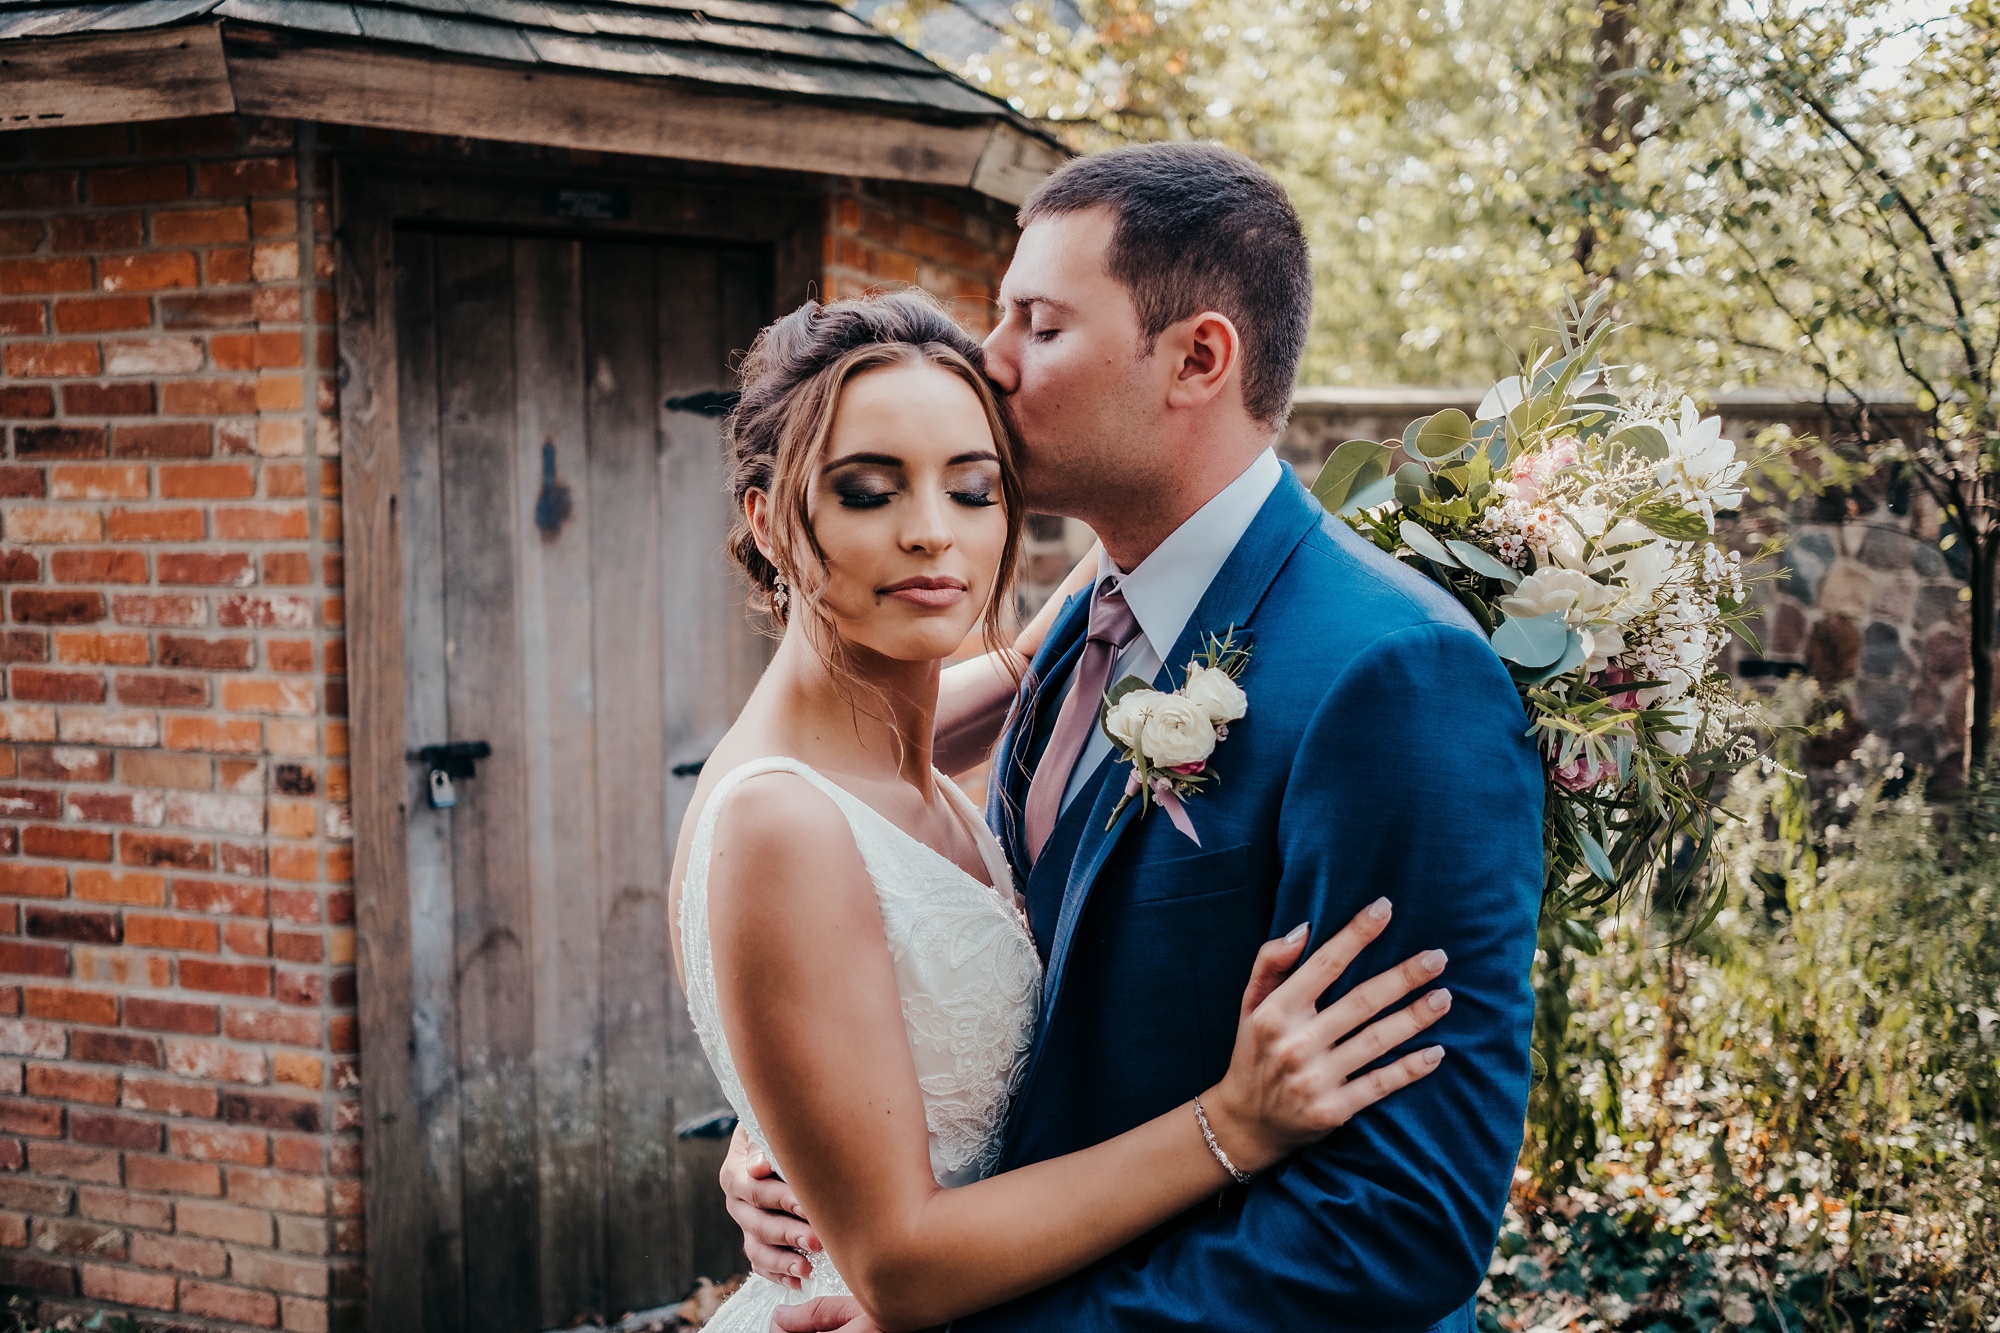 groom kisses bride's forehead during wedding portraits in garden